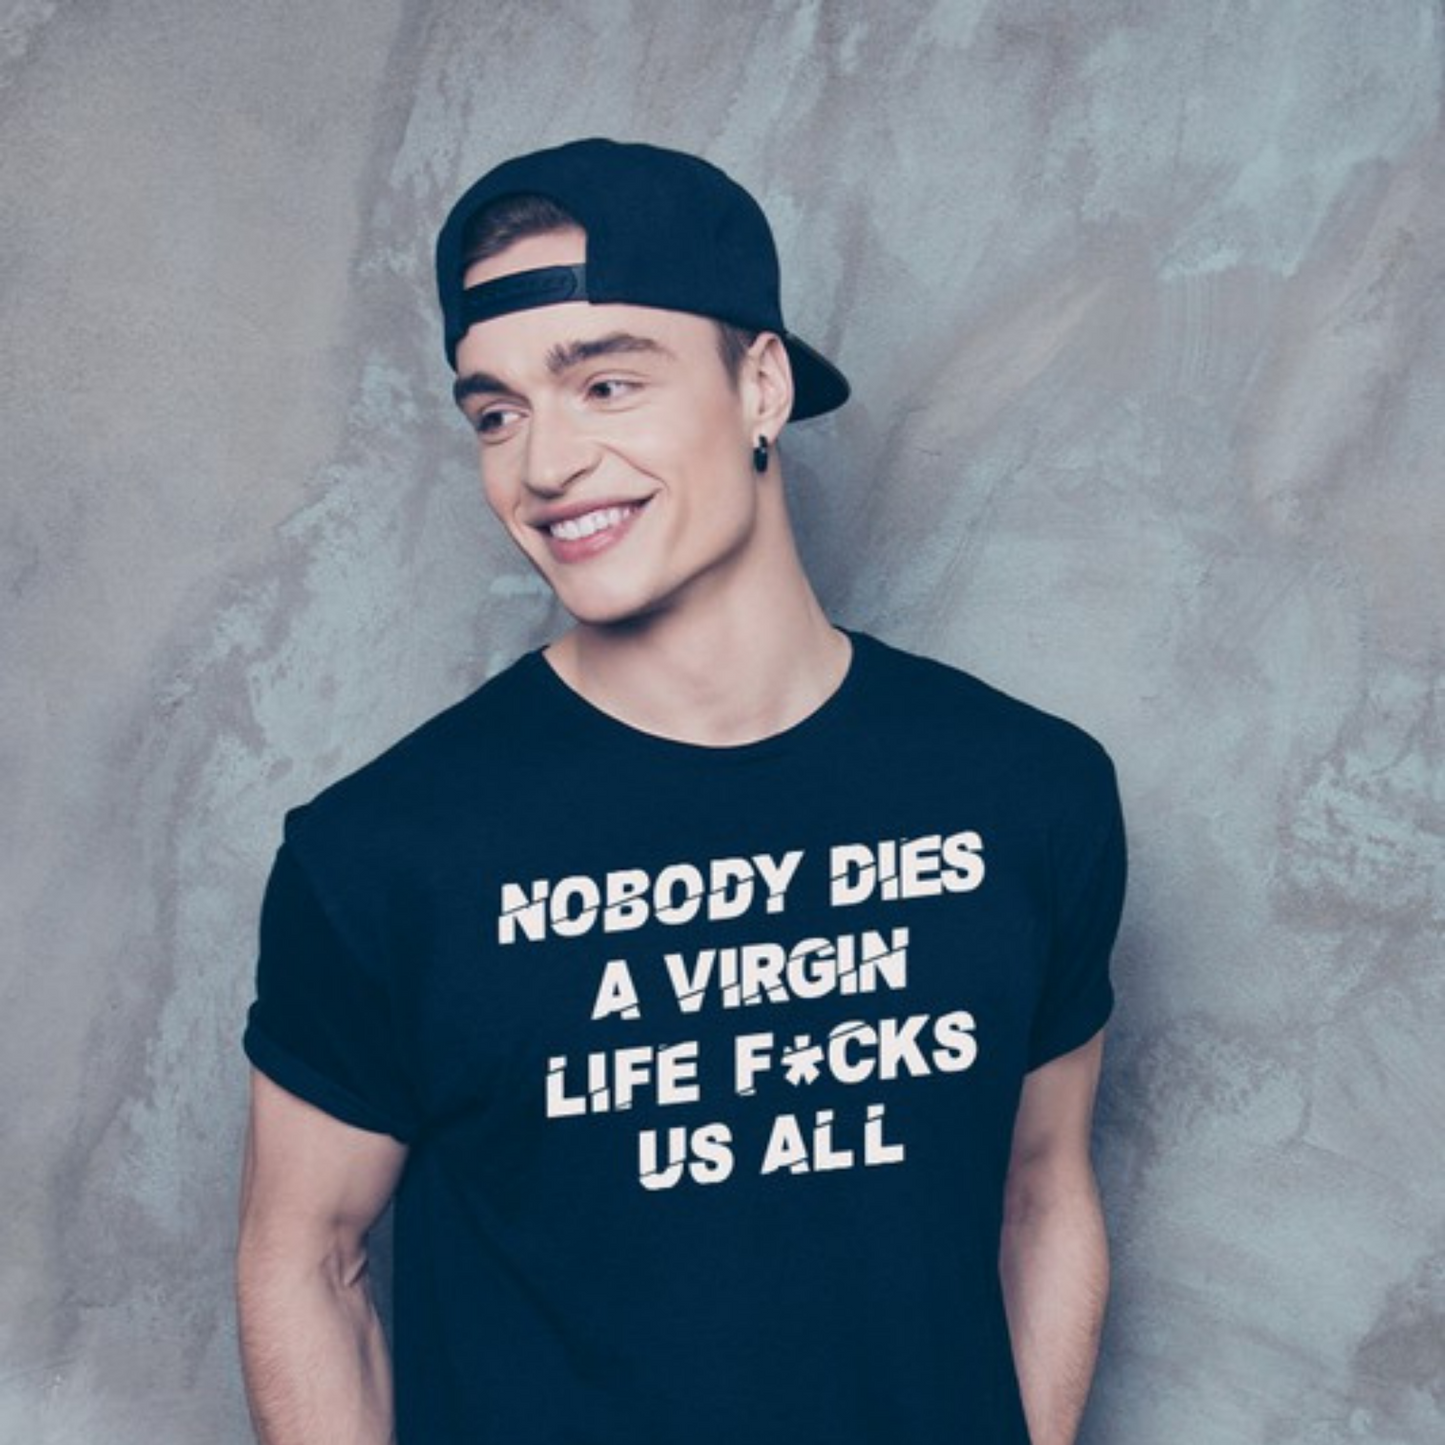 "Nobody Dies a Virgin Life F*cks Us All" Graphic Tee White or Black (S-2XL)